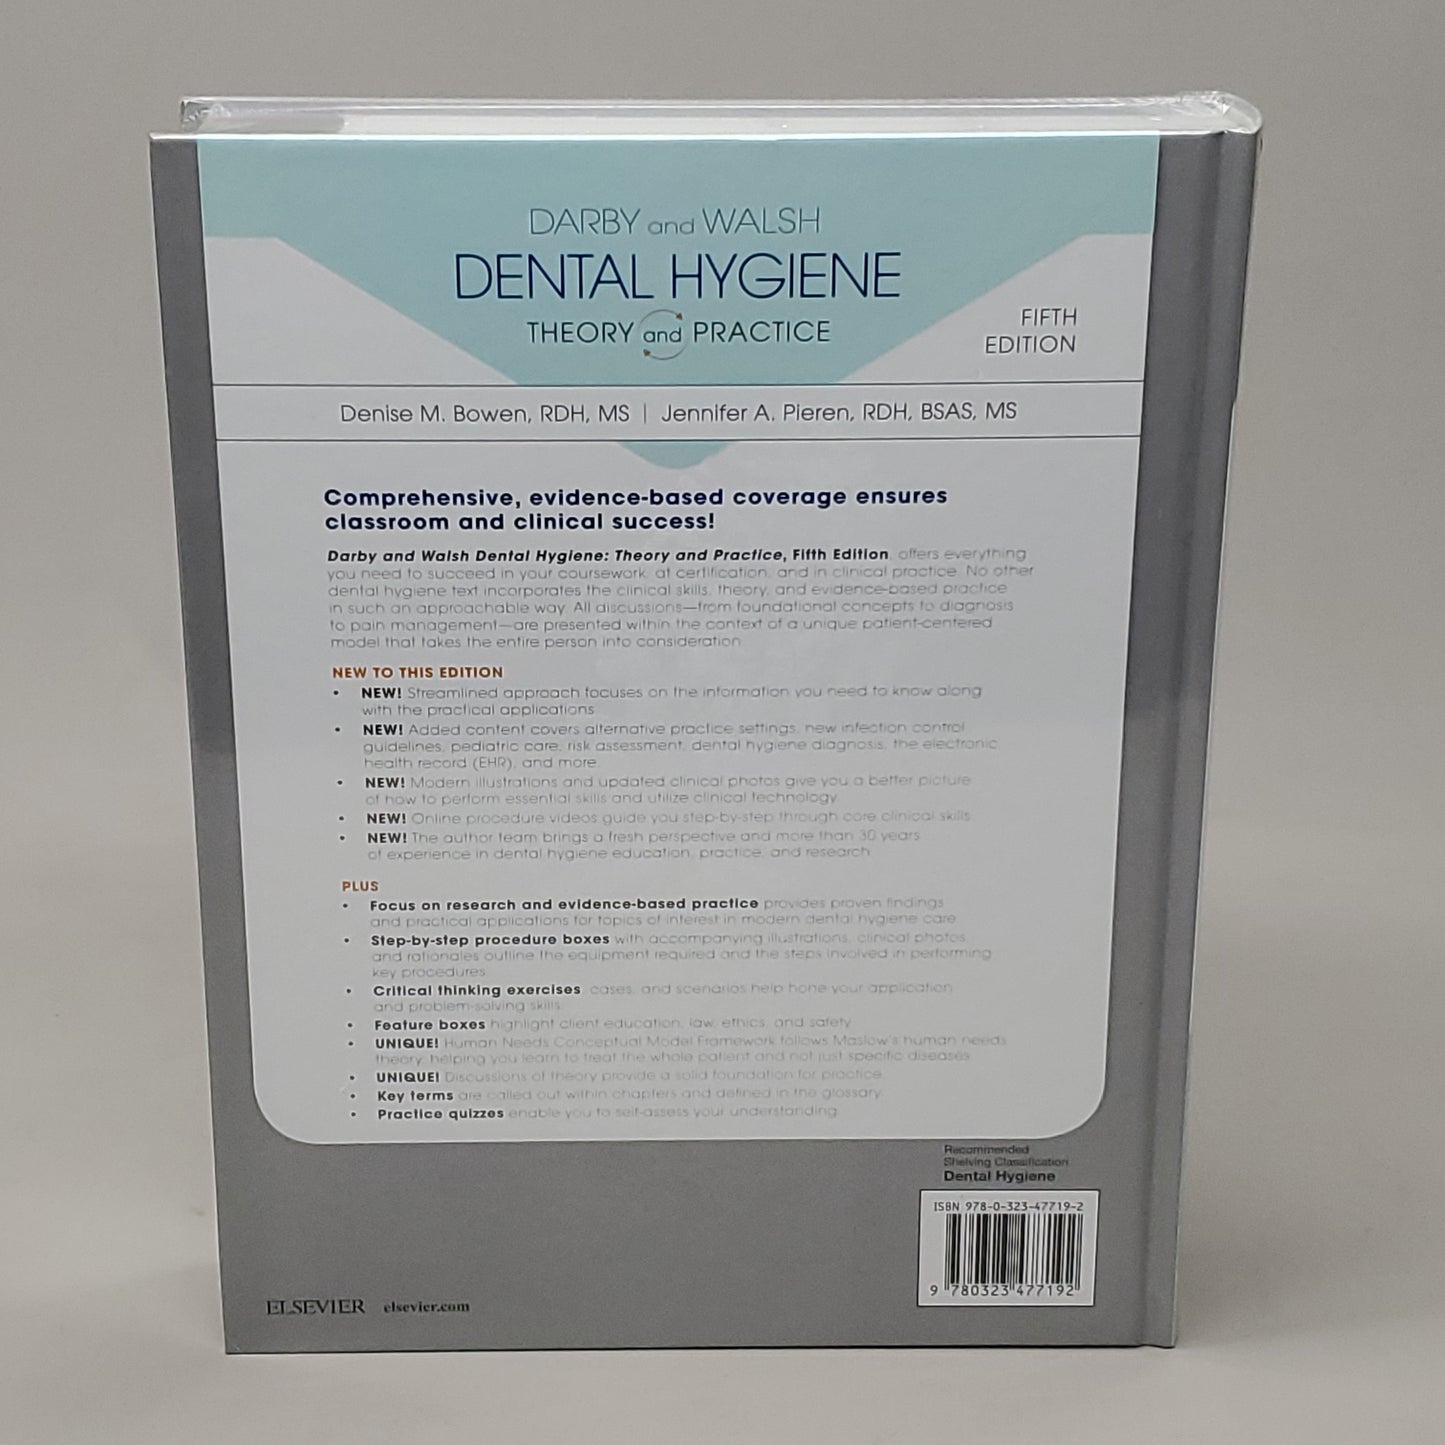 DARBY & WALSH Dental Hygiene Theory & Practice 5th Edition Textbook (New)